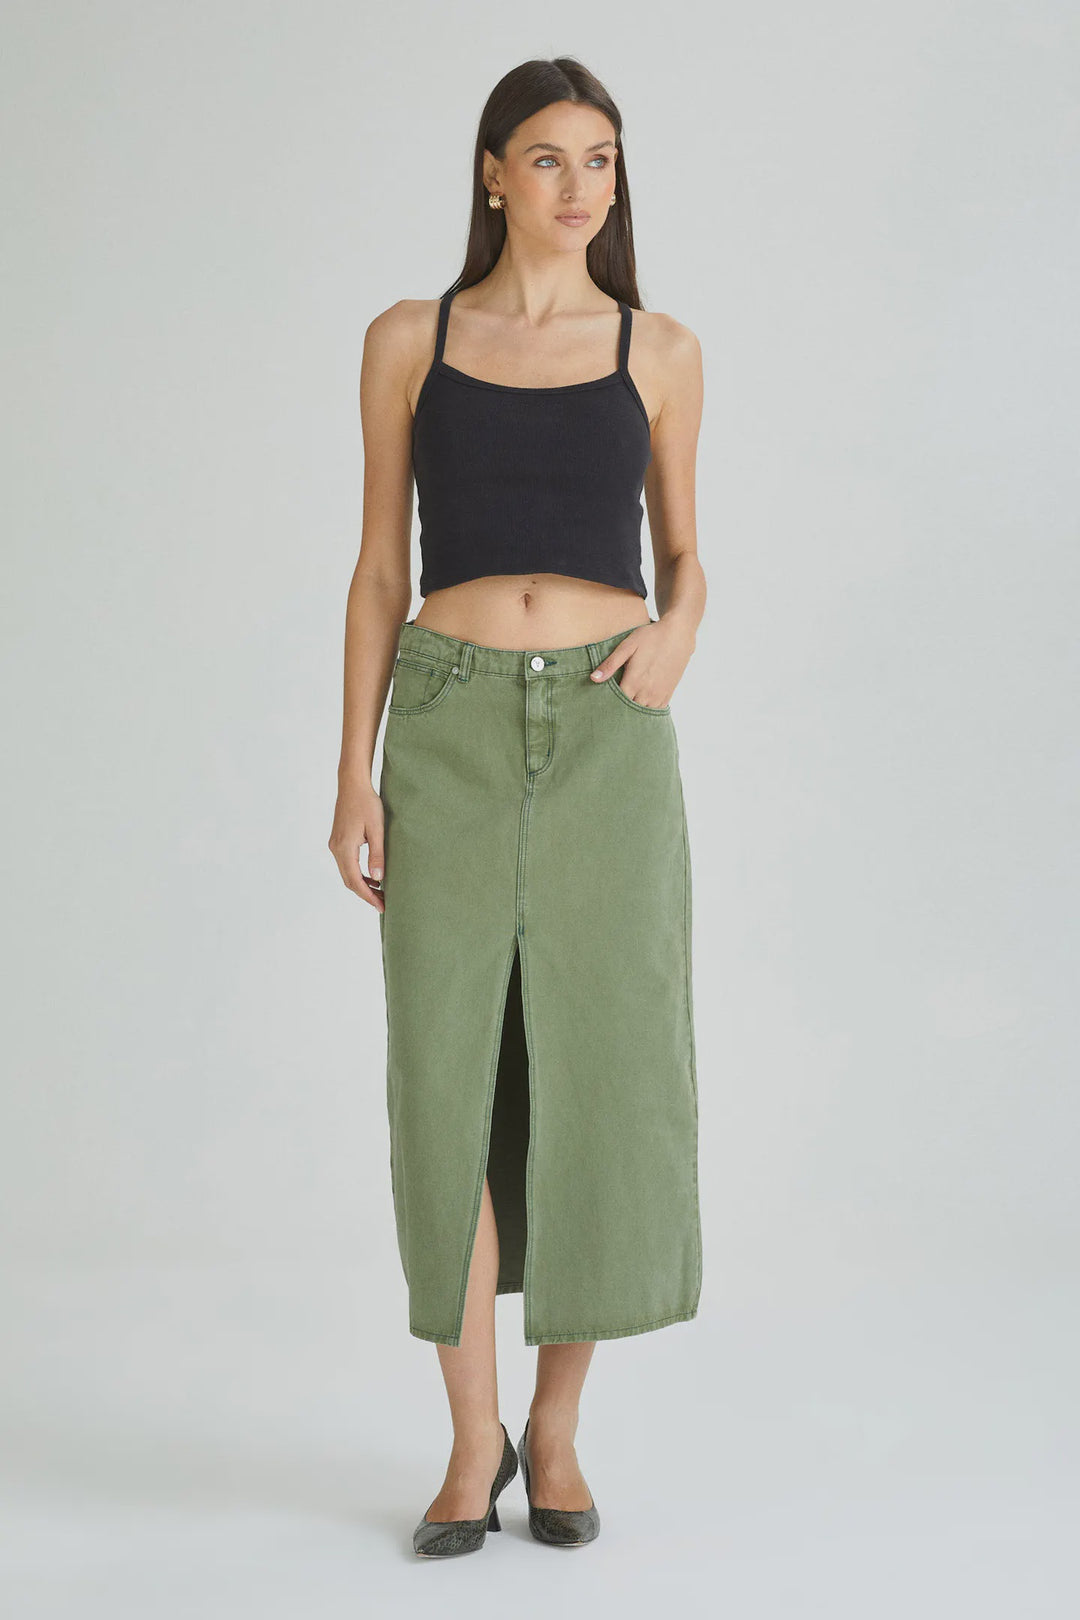 Abrand 99 Low Maxi Skirt - Fade Army